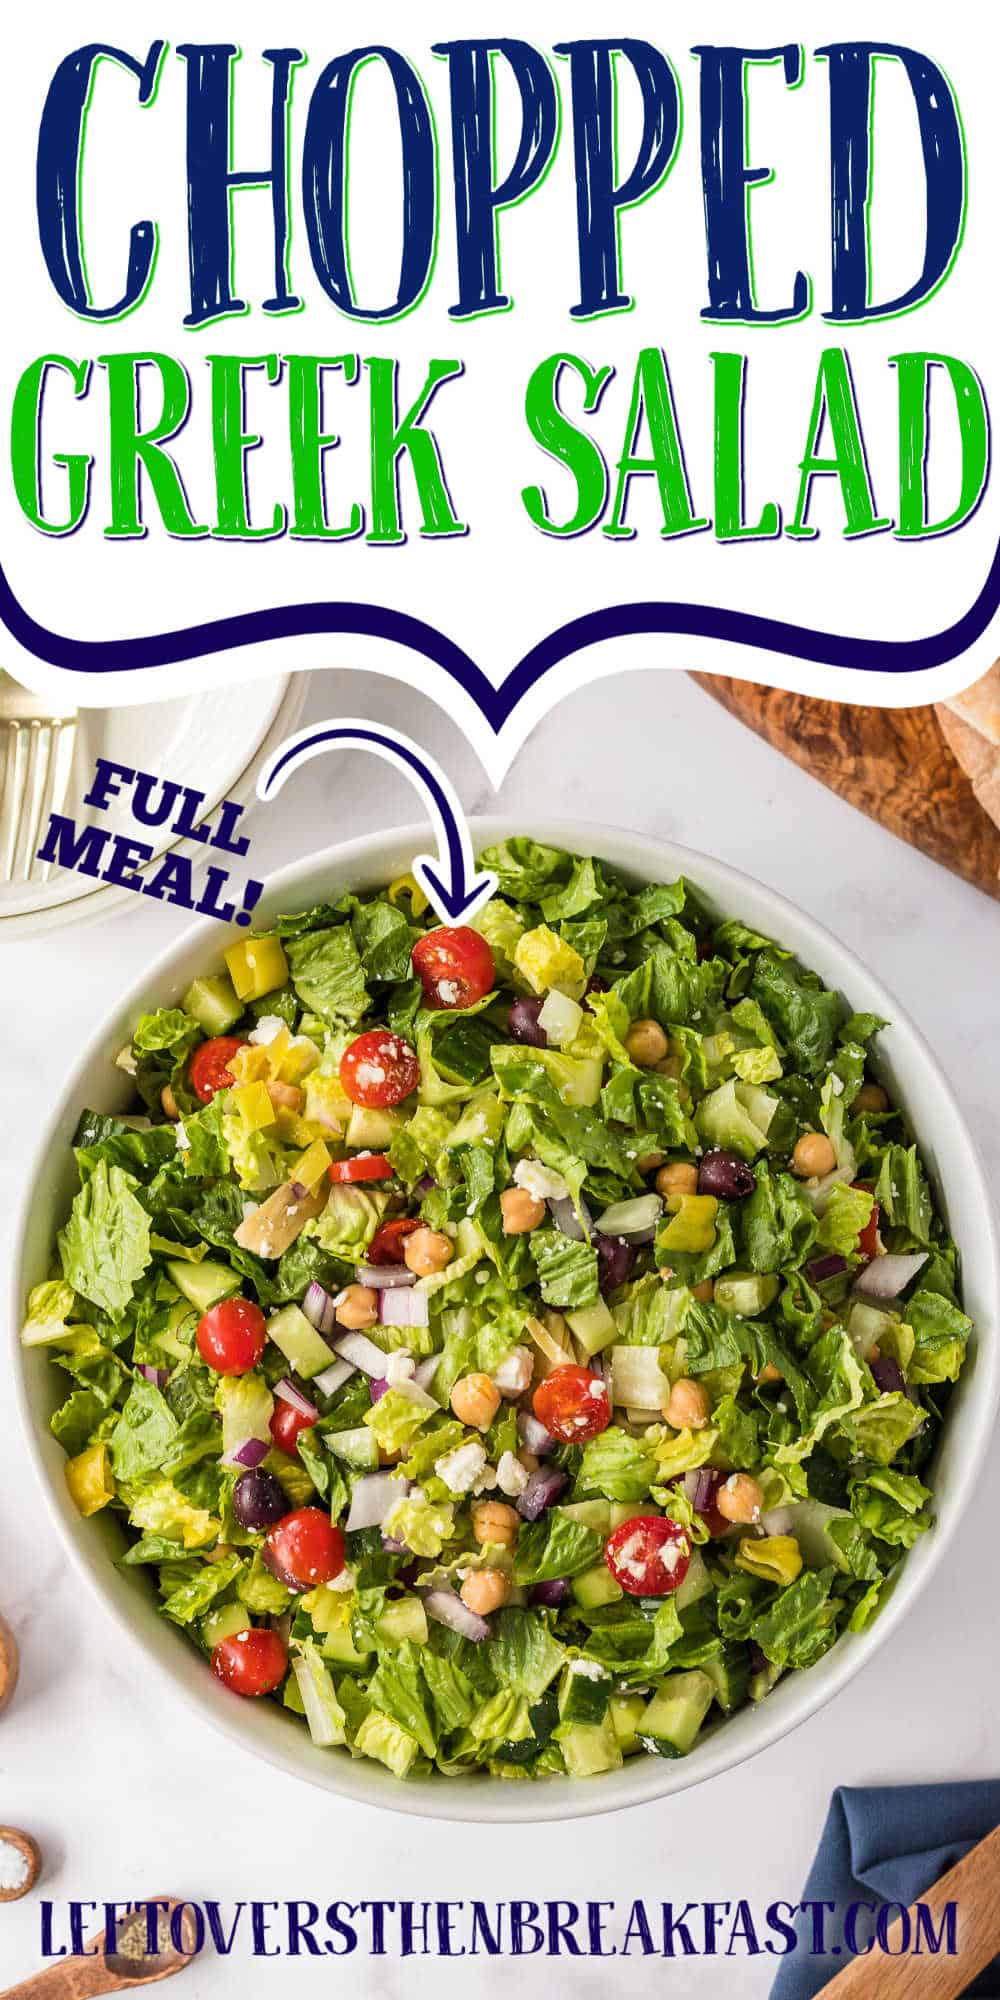 bowl of salad with text "chopped greek salad"